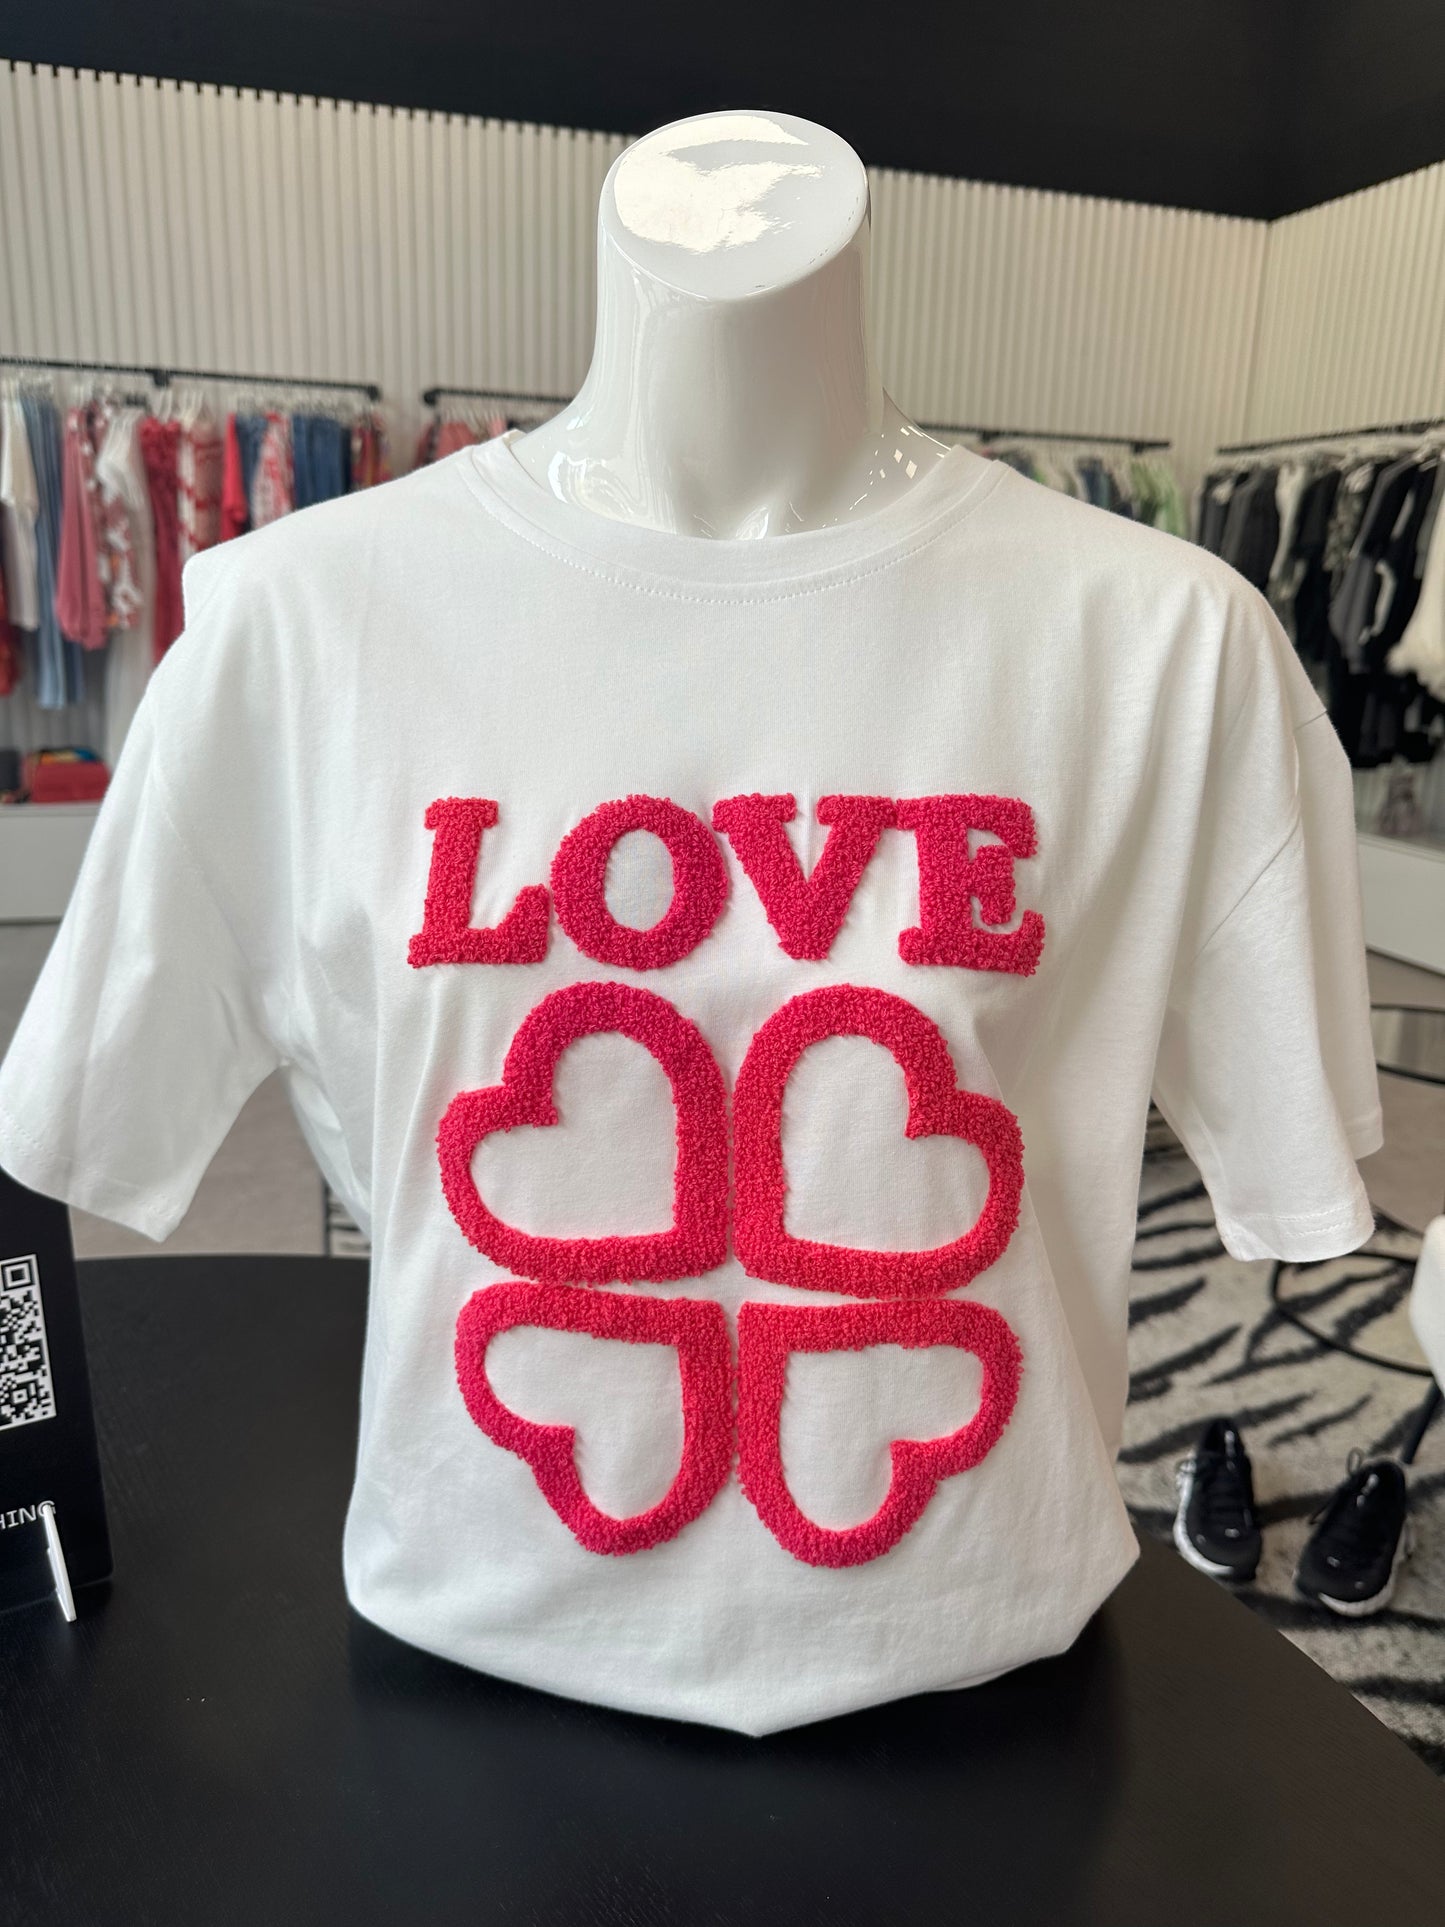 ‘LOVE’ one size t-shirt with towel detail